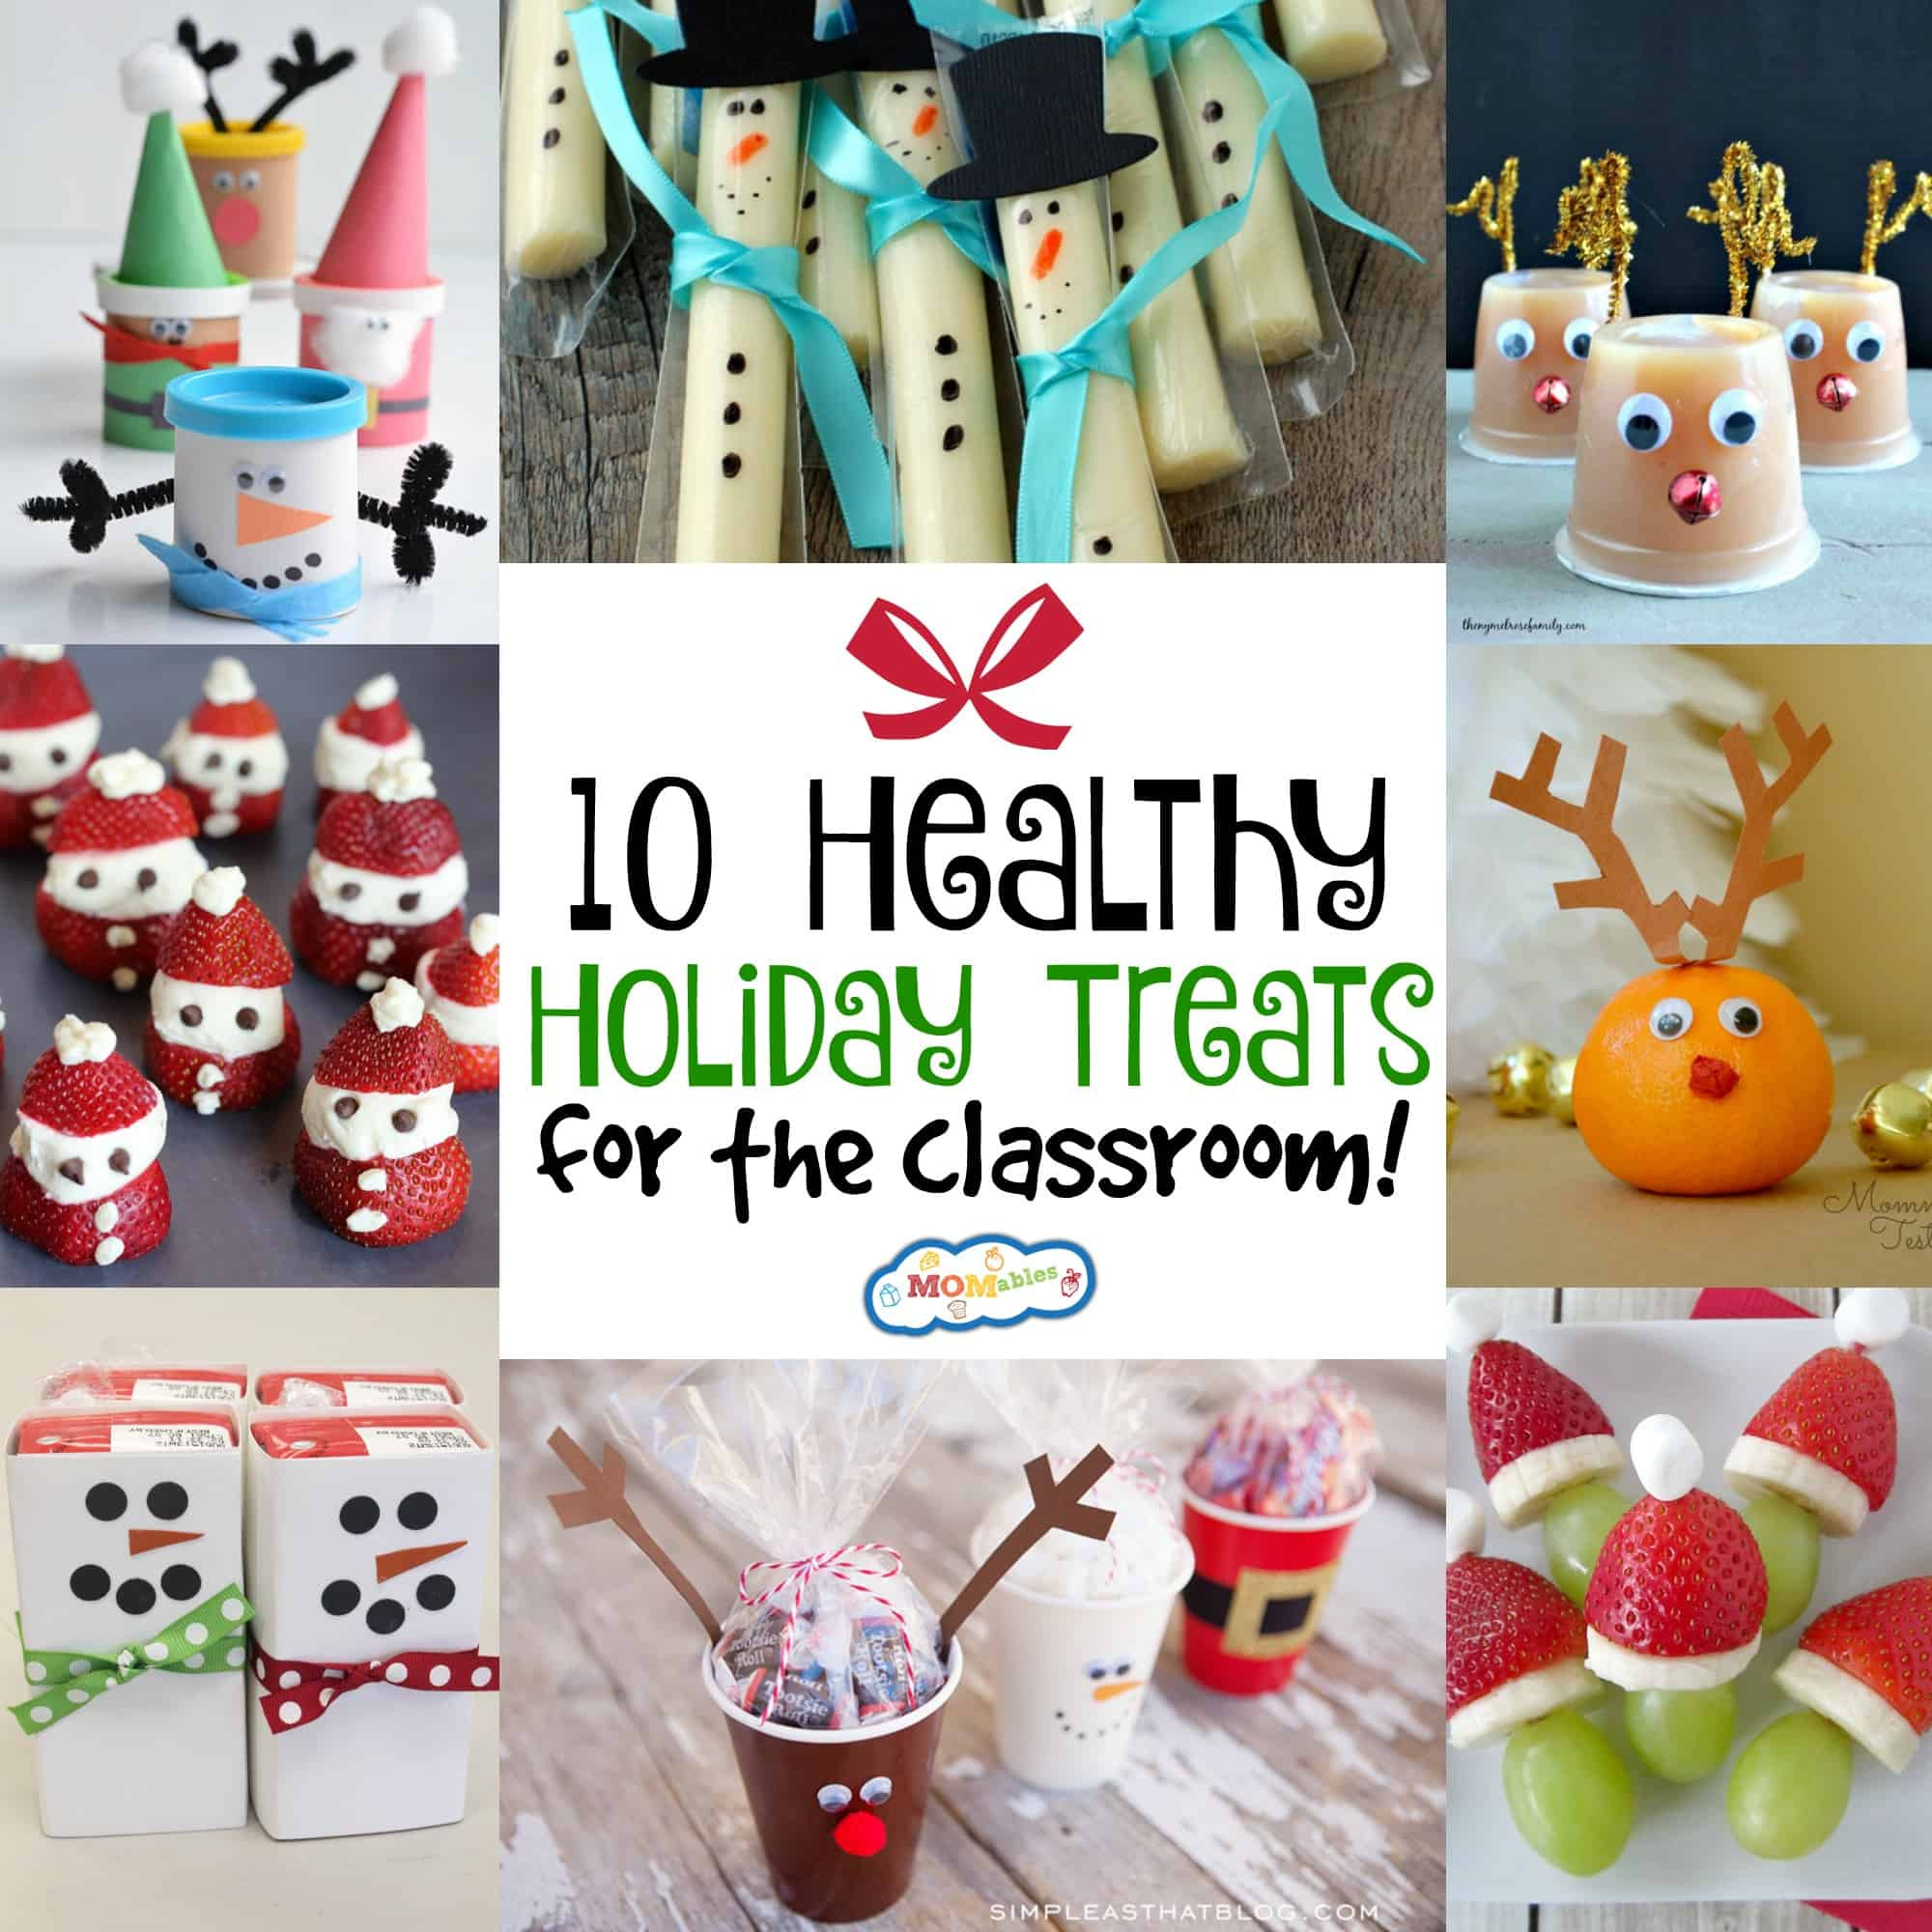 Classroom Holiday Party Ideas
 10 Healthy Holiday Treats for the Classroom MOMables